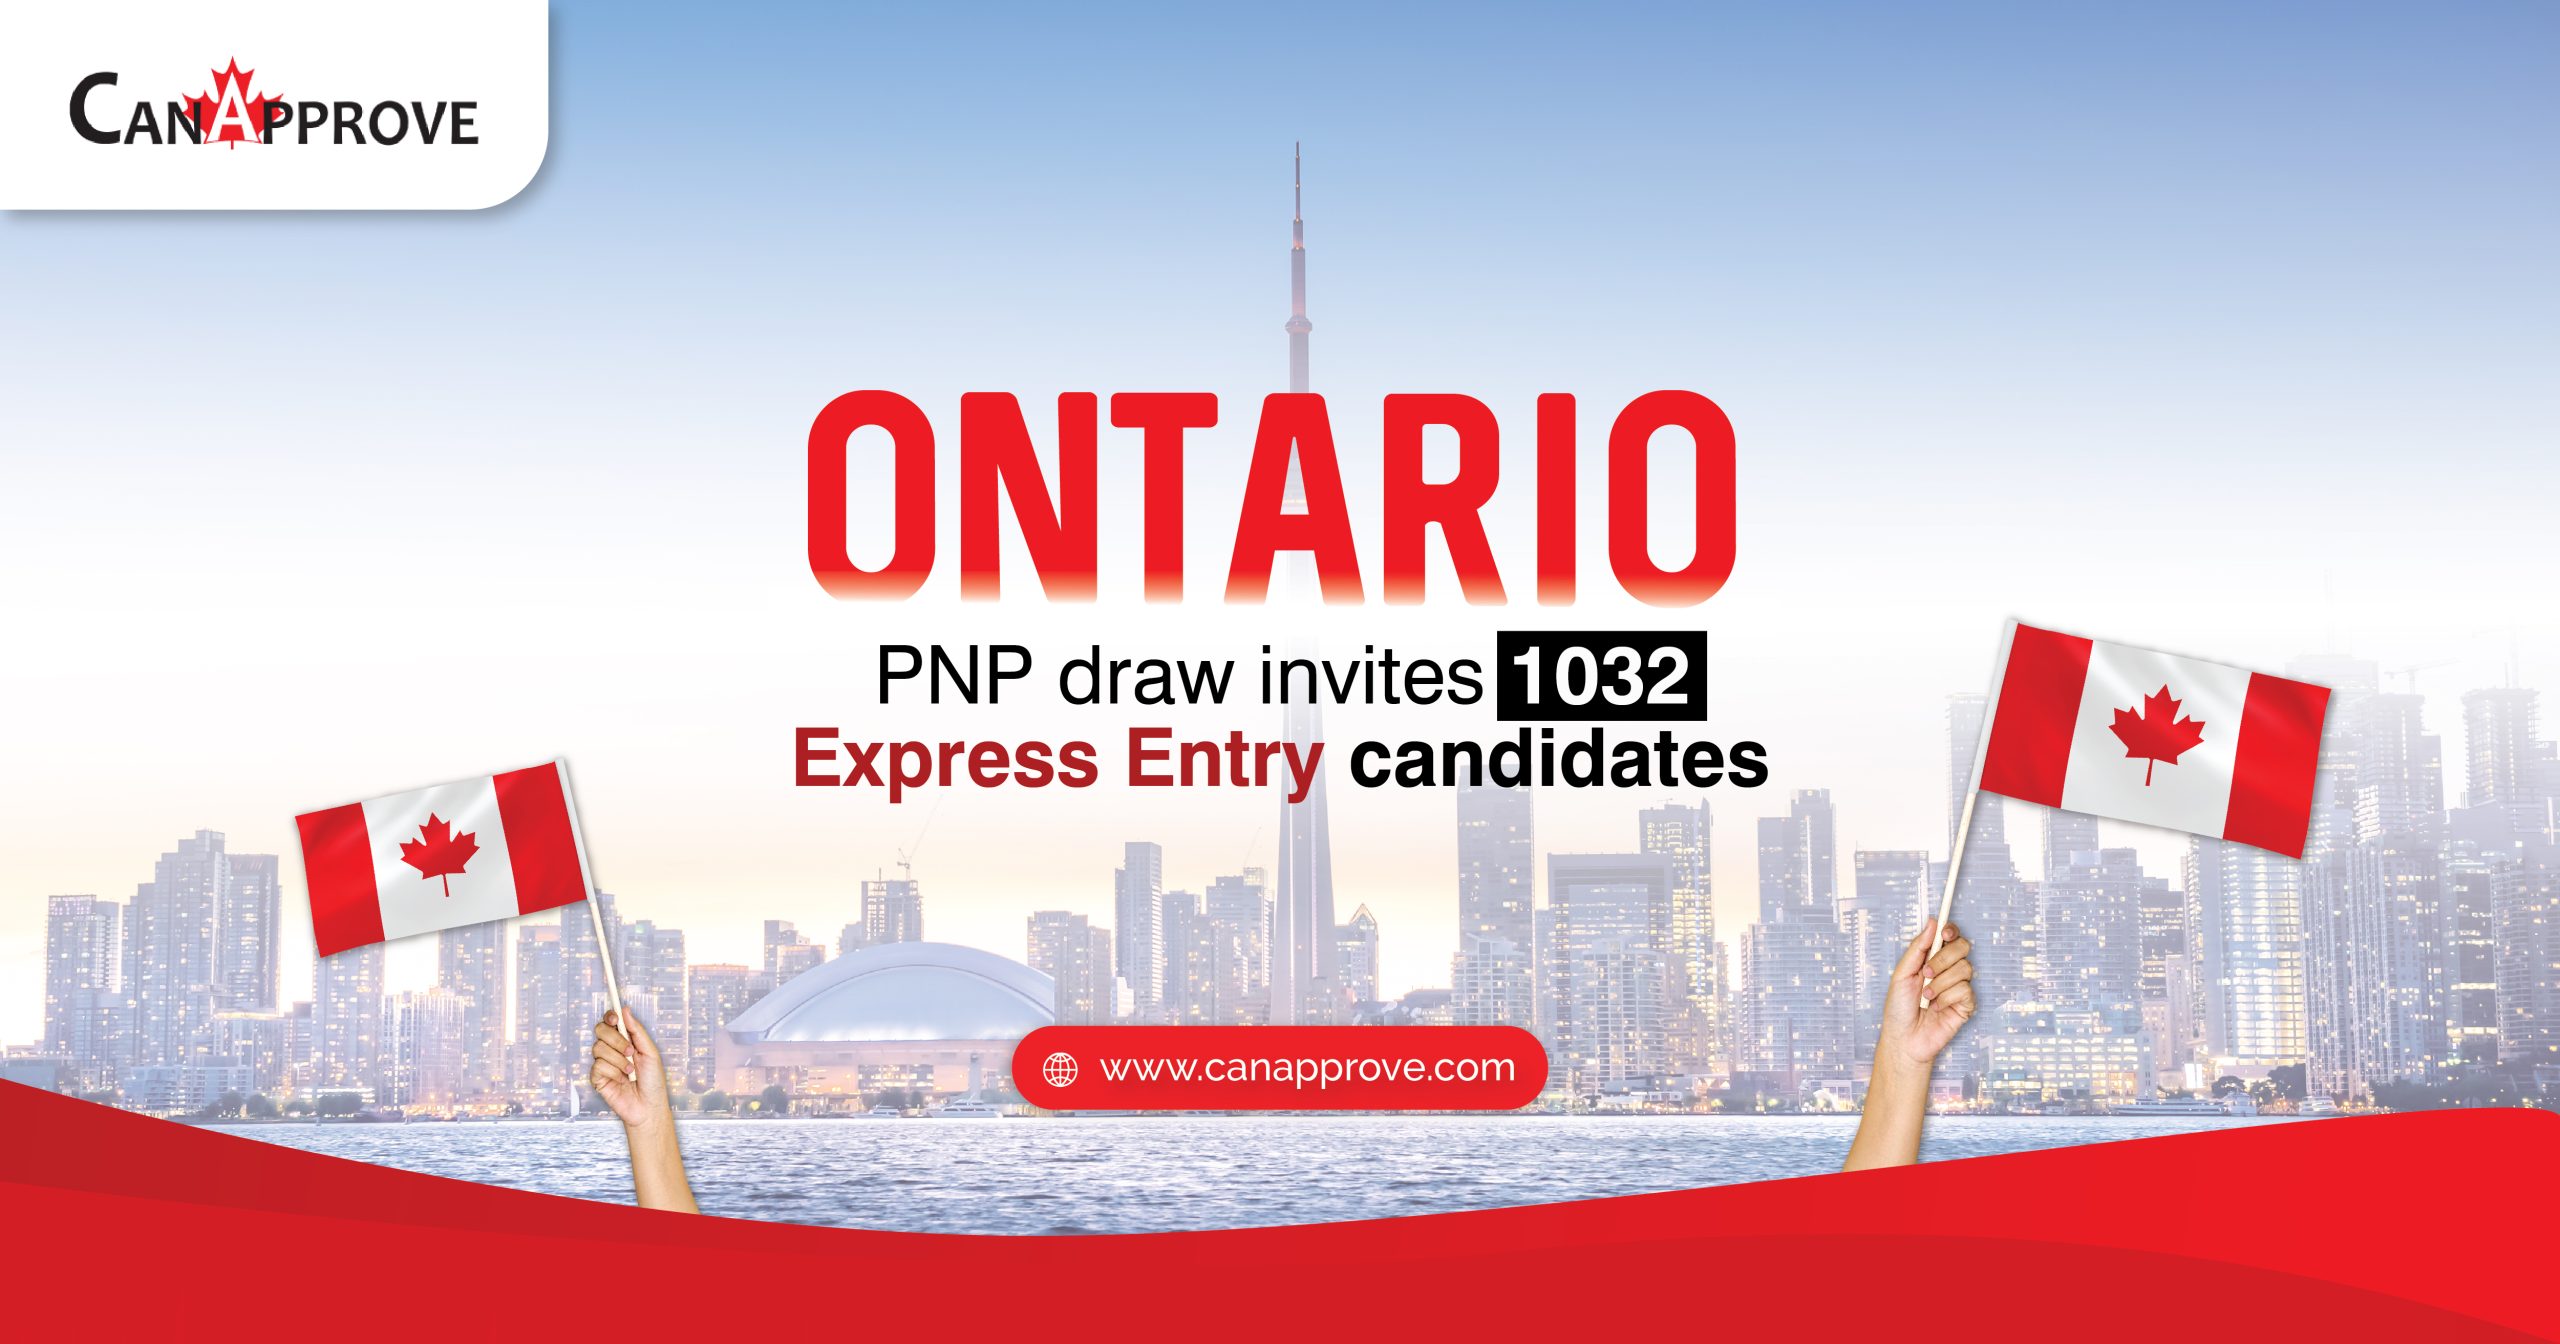 1032 Express Entry candidates invited in January 27 Ontario PNP draw